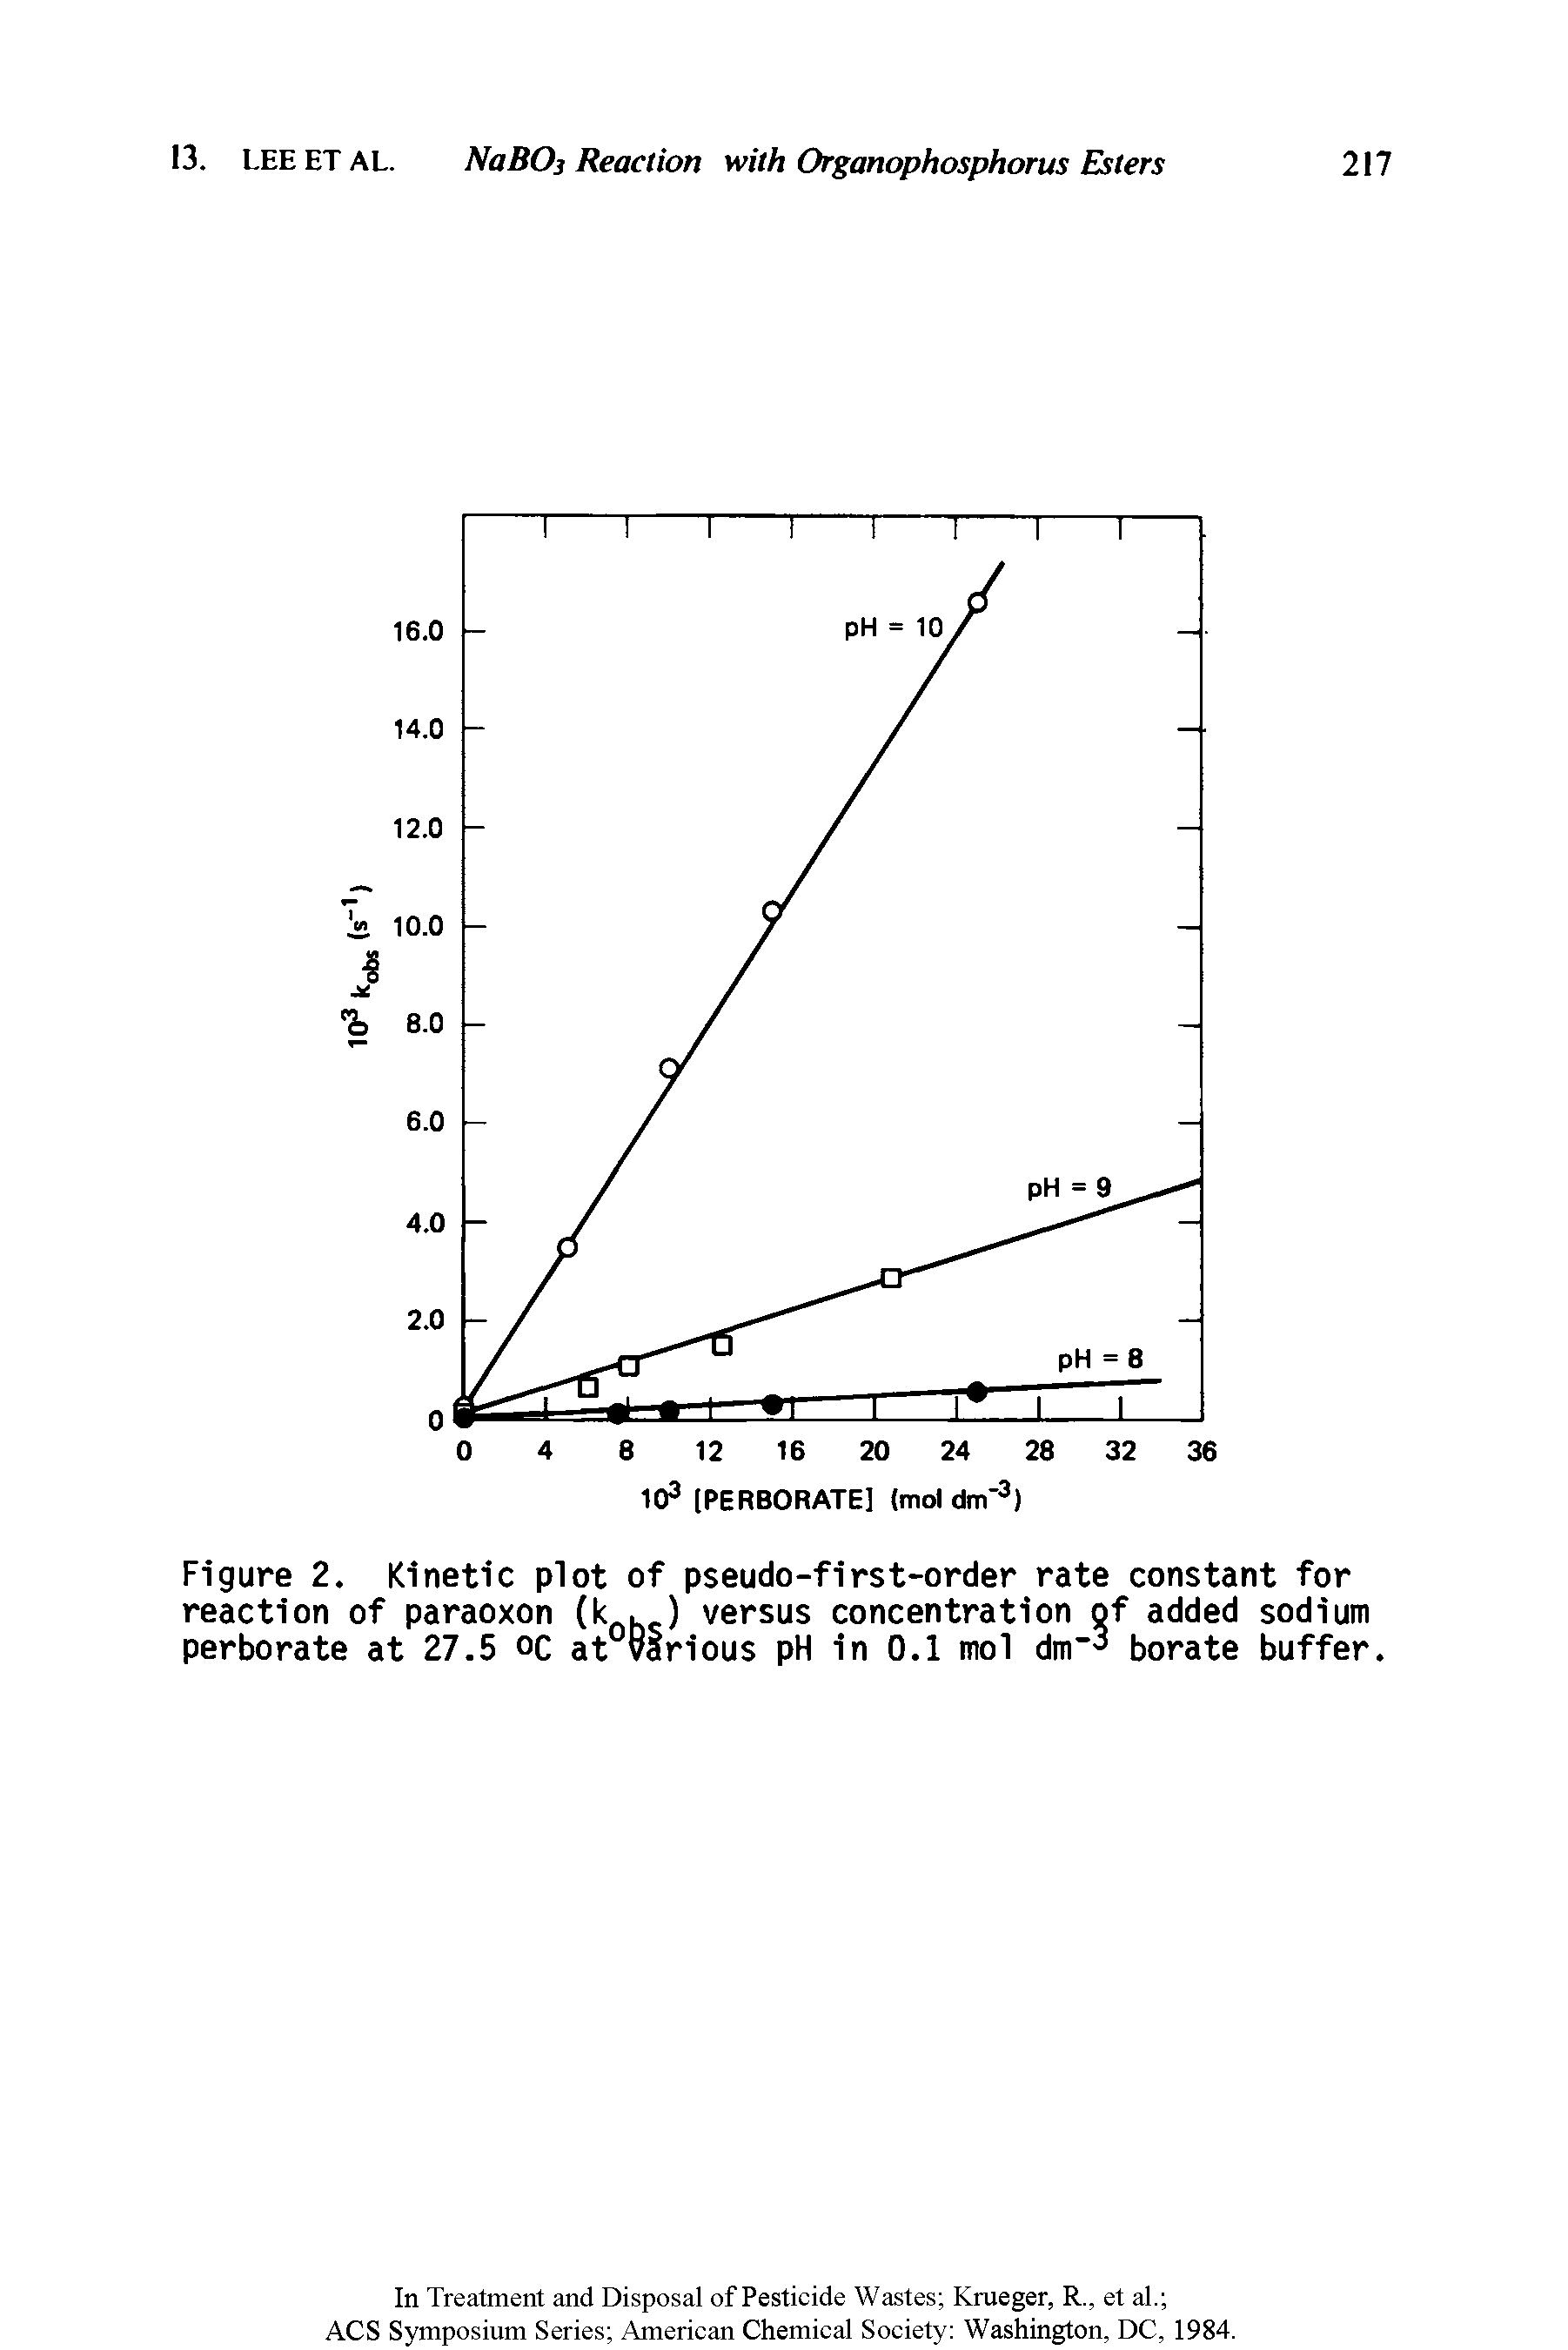 Figure 2. Kinetic plot of pseudo-first-order rate constant for reaction of paraoxon (kohc) versus concentration of added sodium perborate at 27.5 oc avvarious pH in 0.1 mol dm borate buffer.